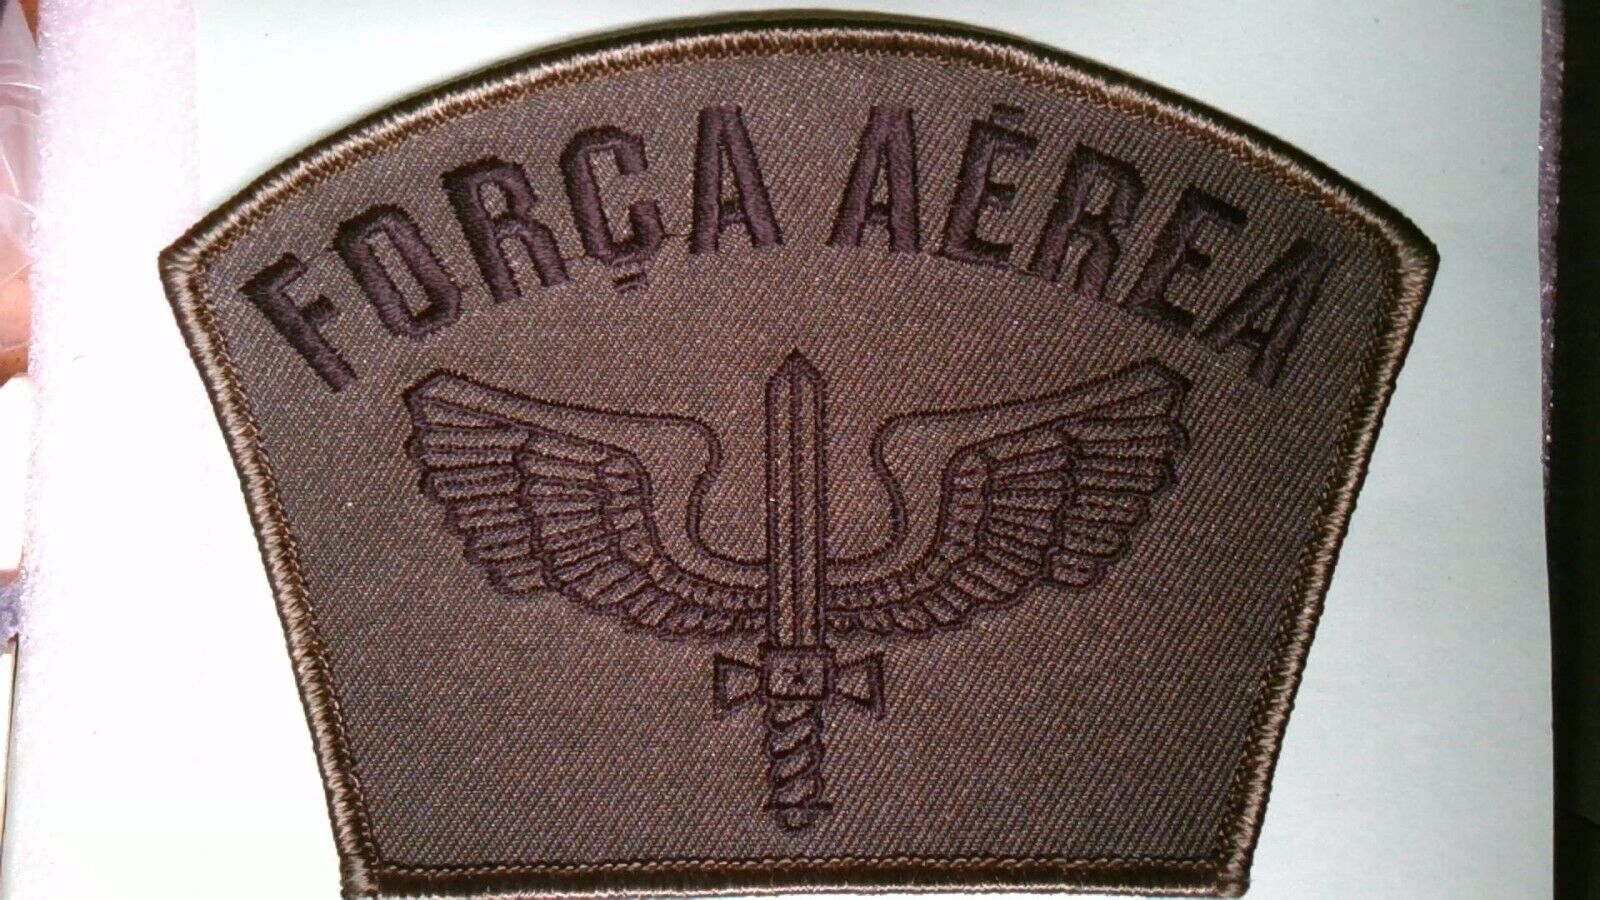 MILITARY SHOULDER PATCH SEW ON BRAZILIAN AIR FORCE FORCA AEREA